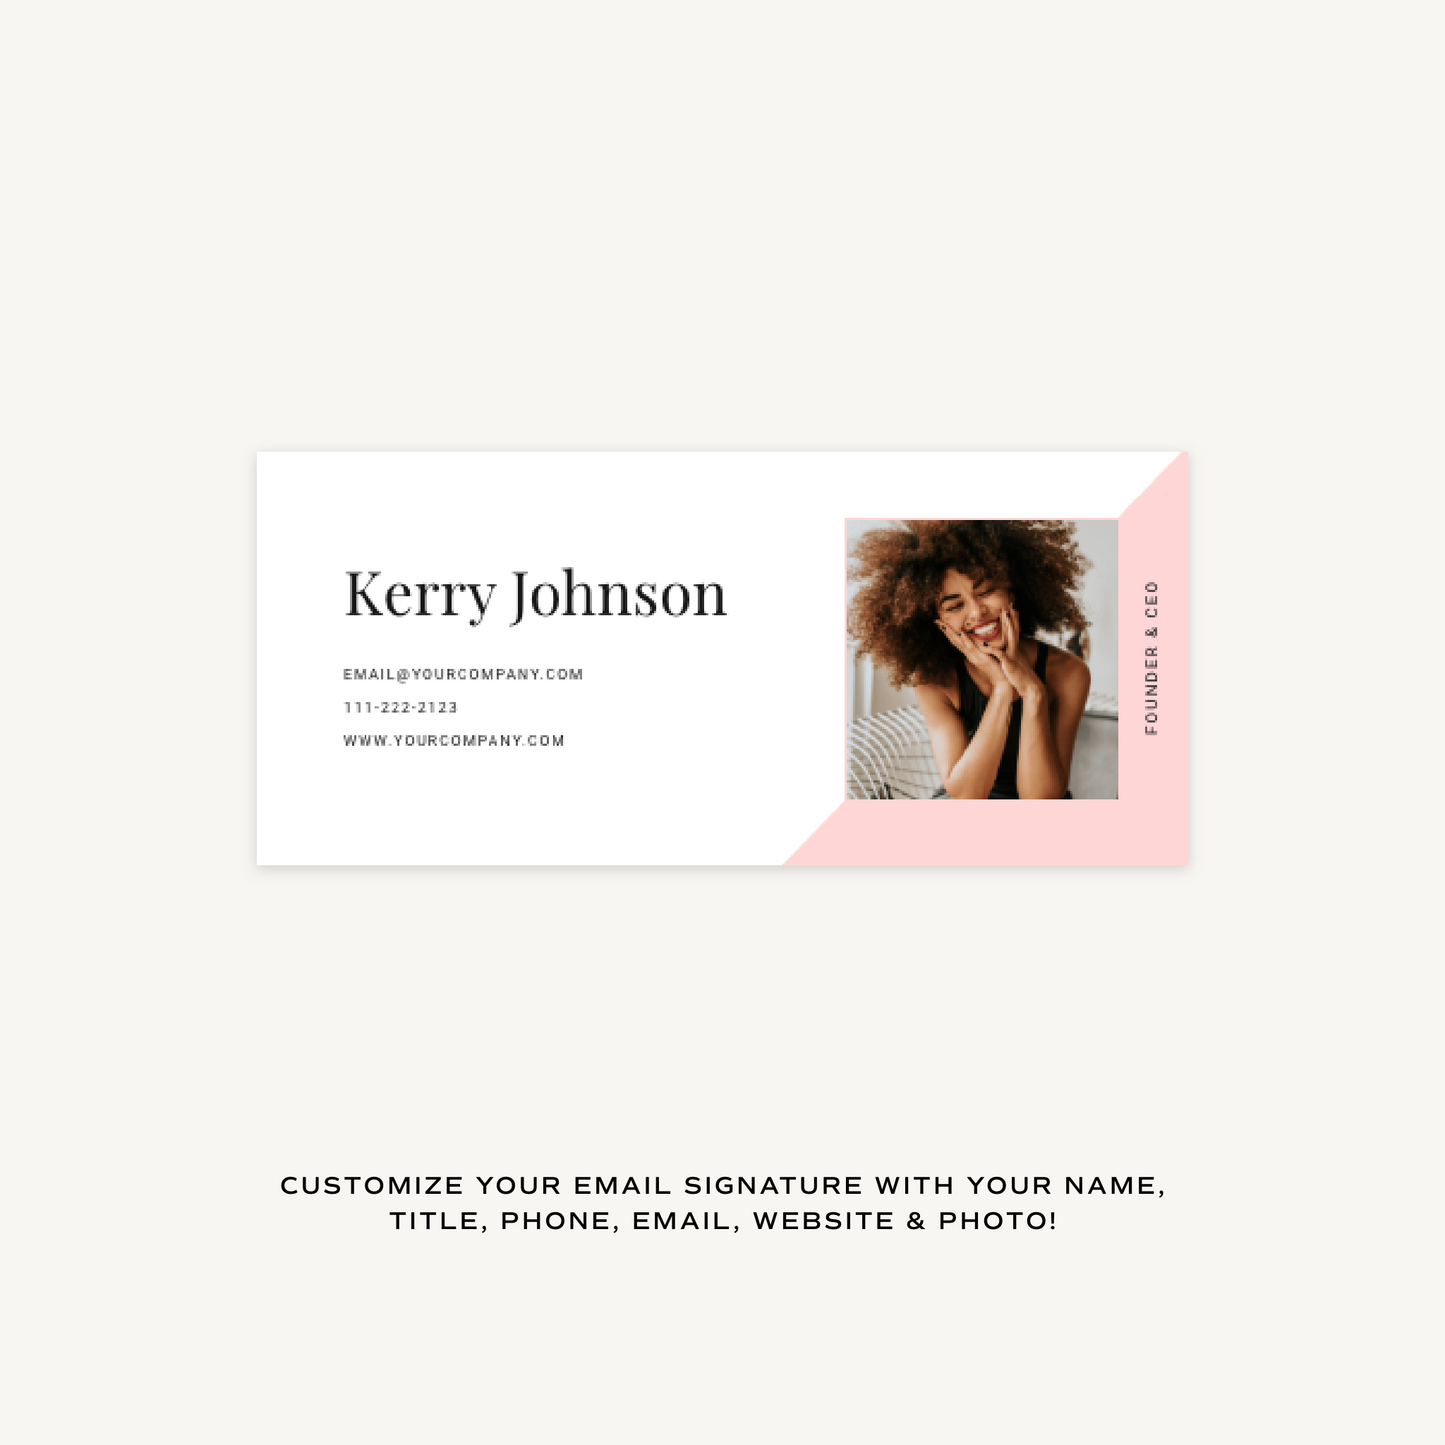 Kerry Email Signature Collection